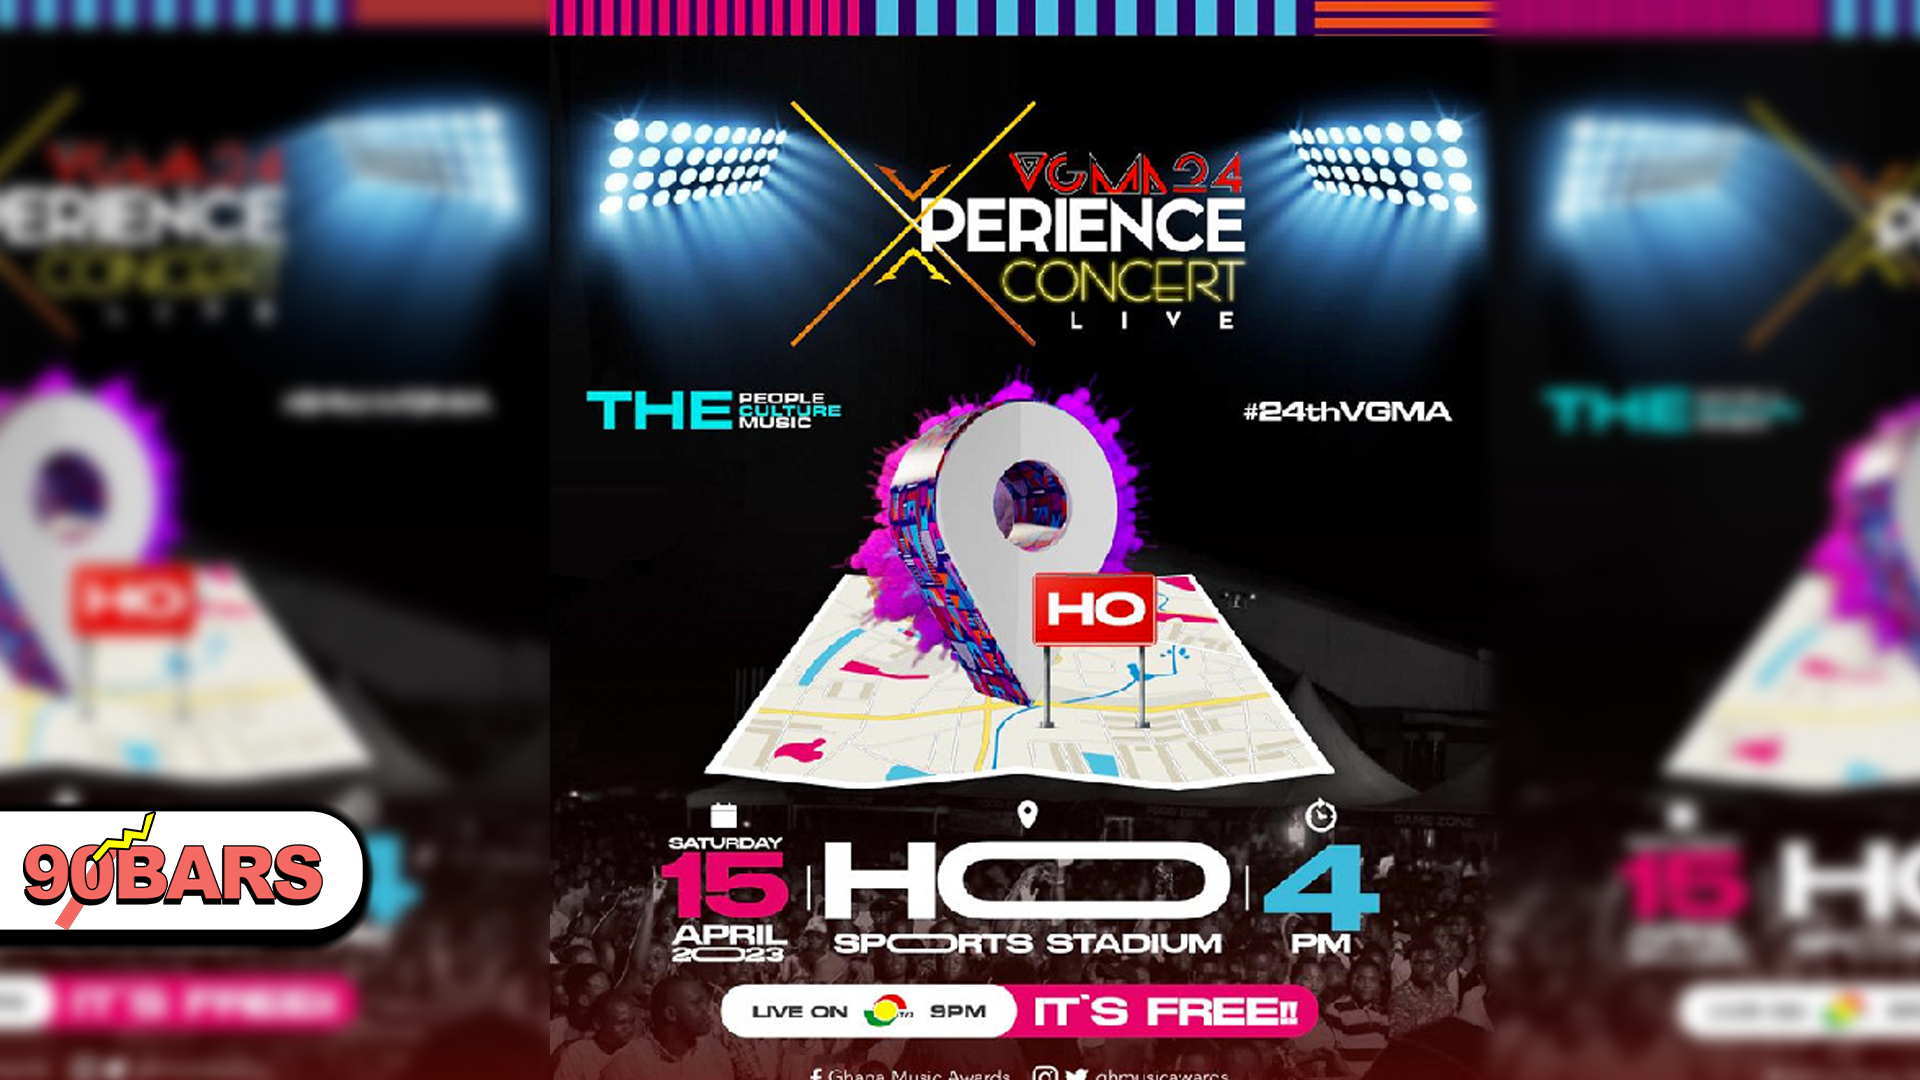 The 24thVGMA Xperience Concert Visits HO